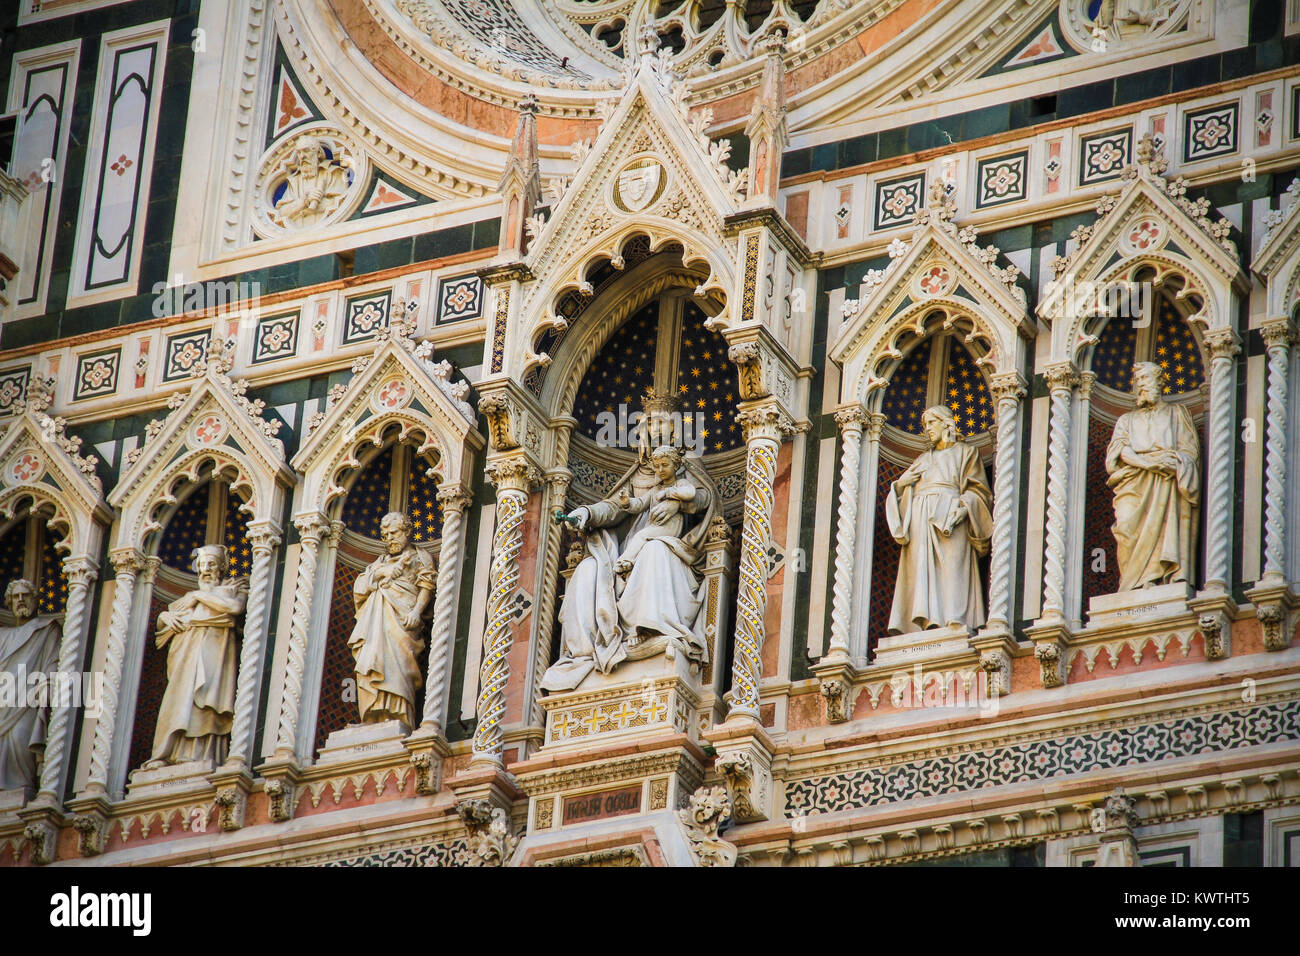 Statues and details on the facade of the Cathedral Santa Maria del Fiore, The Dome in Florence, Tuscany, Italy Stock Photo